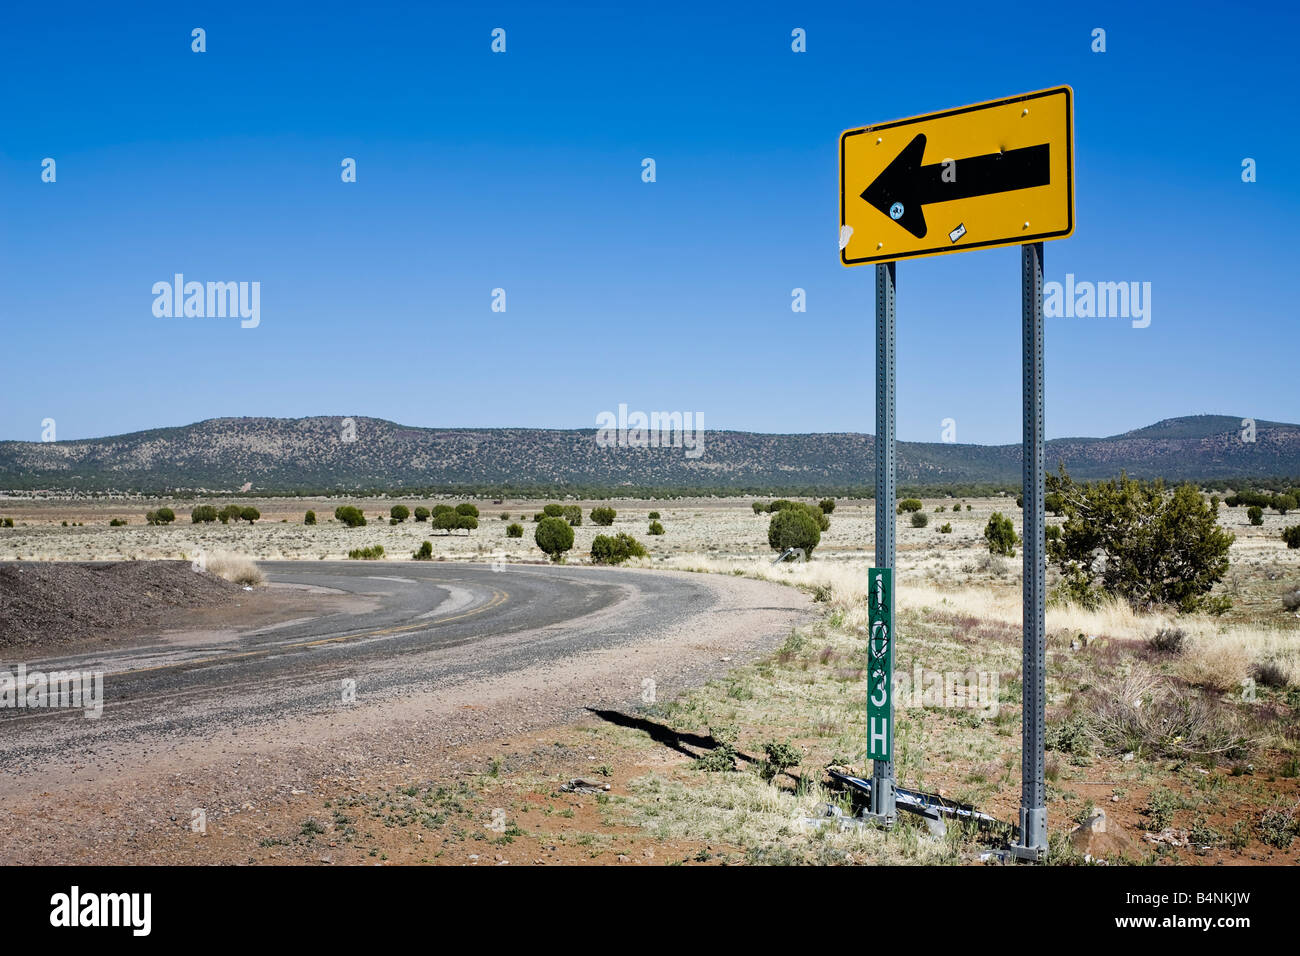 Yellow sign showing direction next to a road Stock Photo